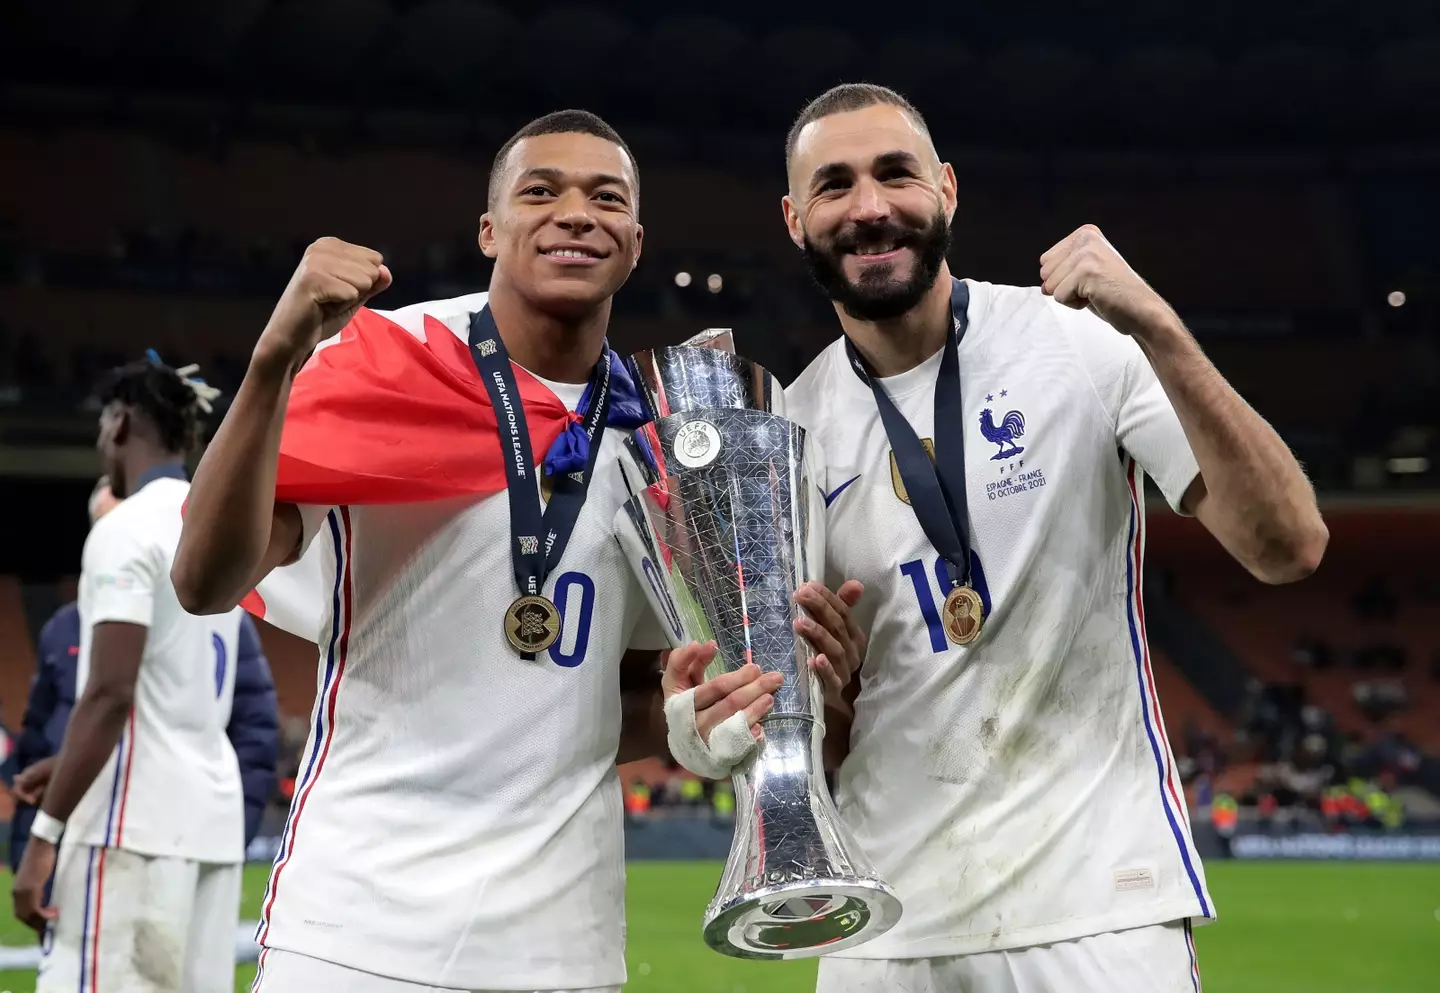 Benzema lifting the Nations League trophy with his teammate Kylian Mbappe. Image: PA Images